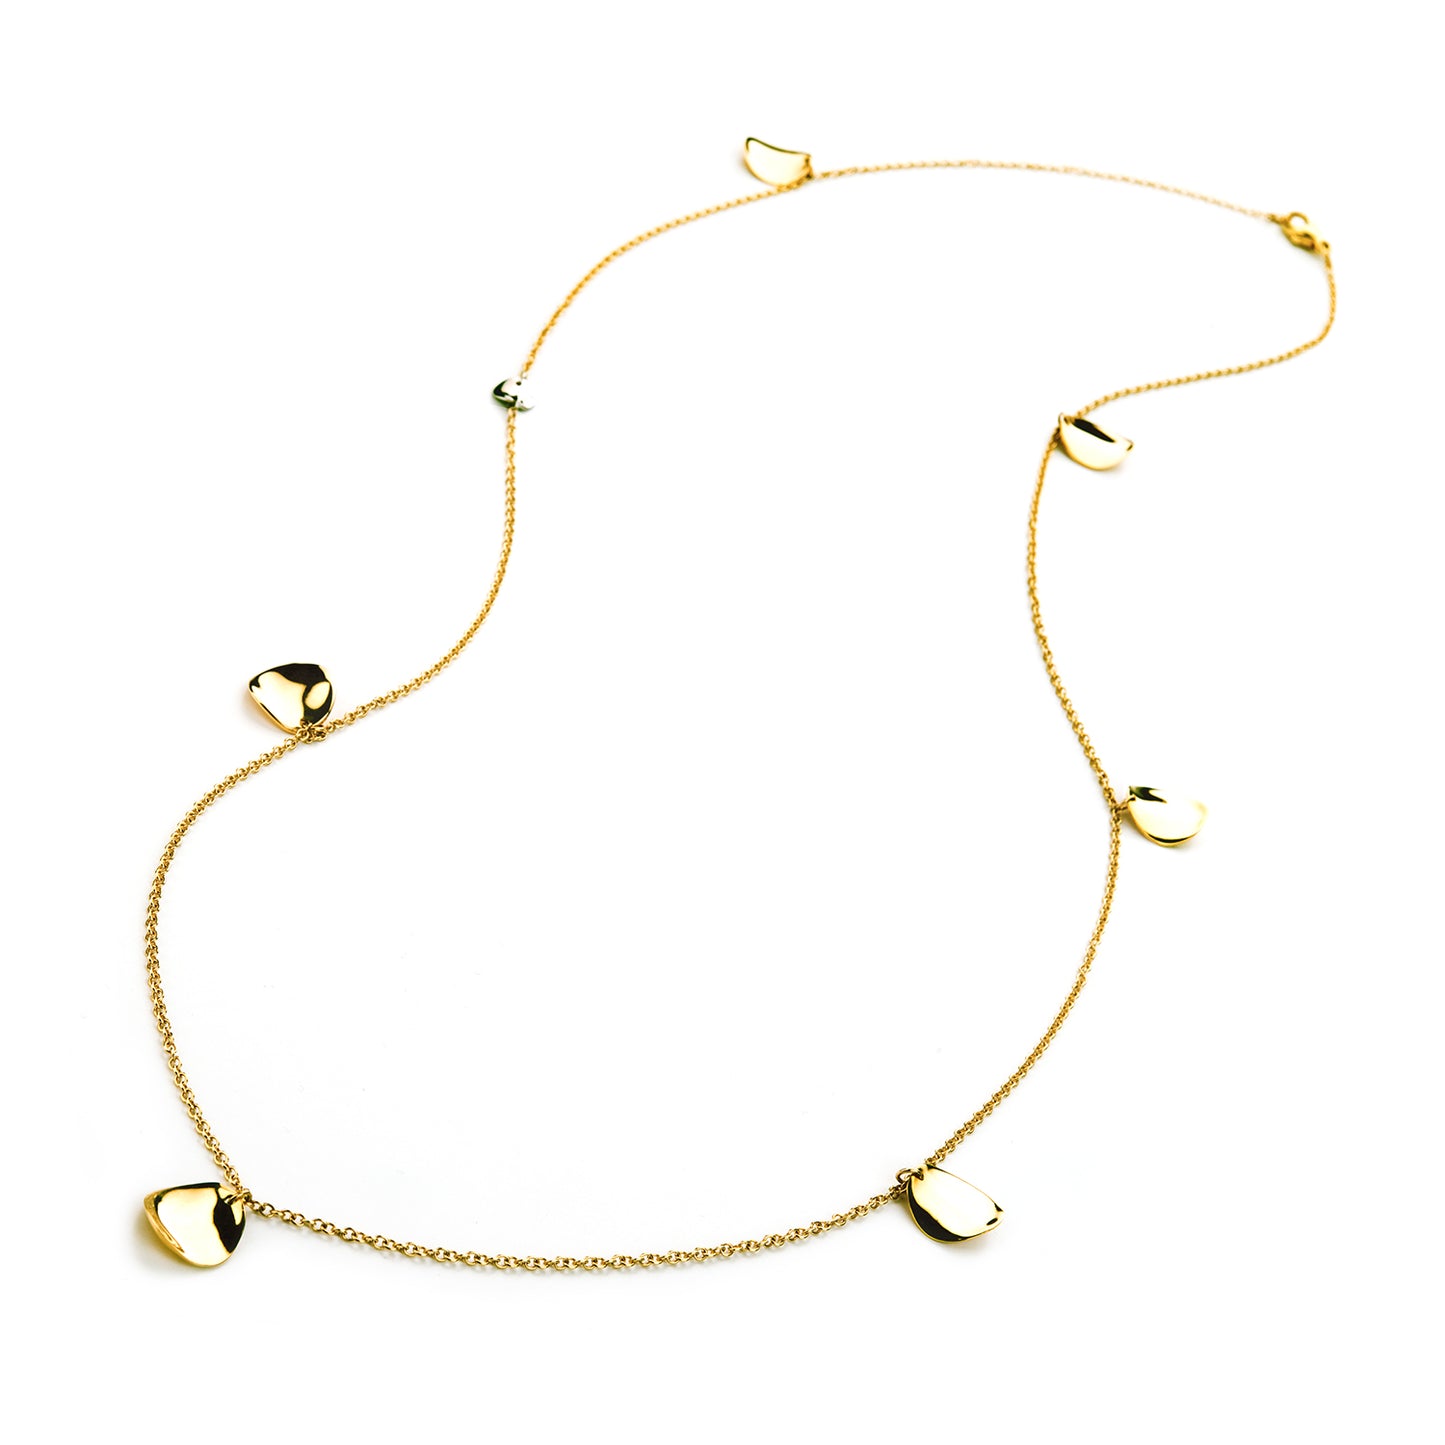 Long gold necklace with charms